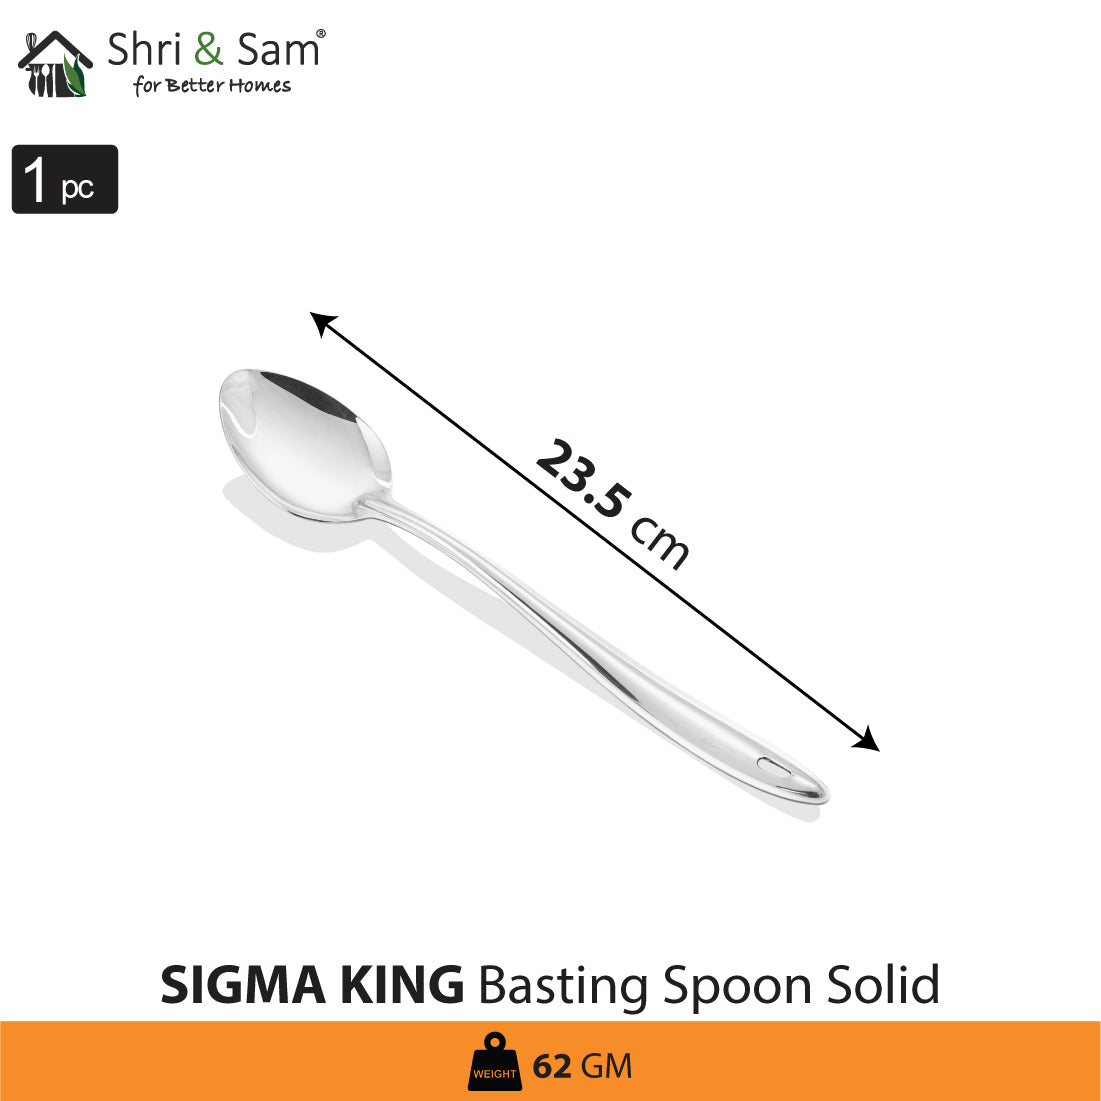 Stainless Steel Basting Spoon Solid Sigma King